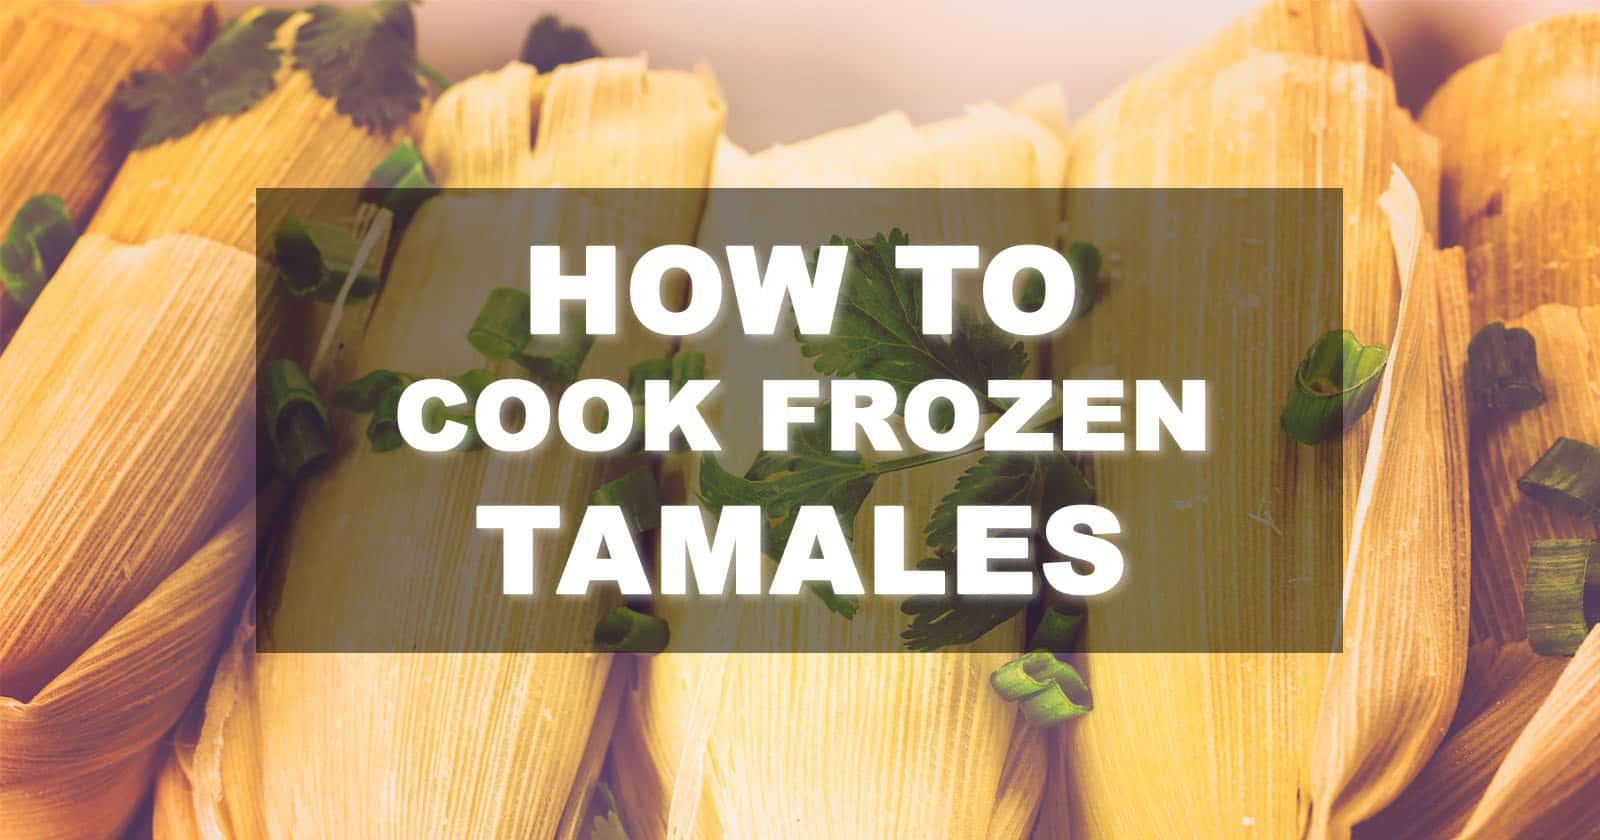 How to cook frozen tamales